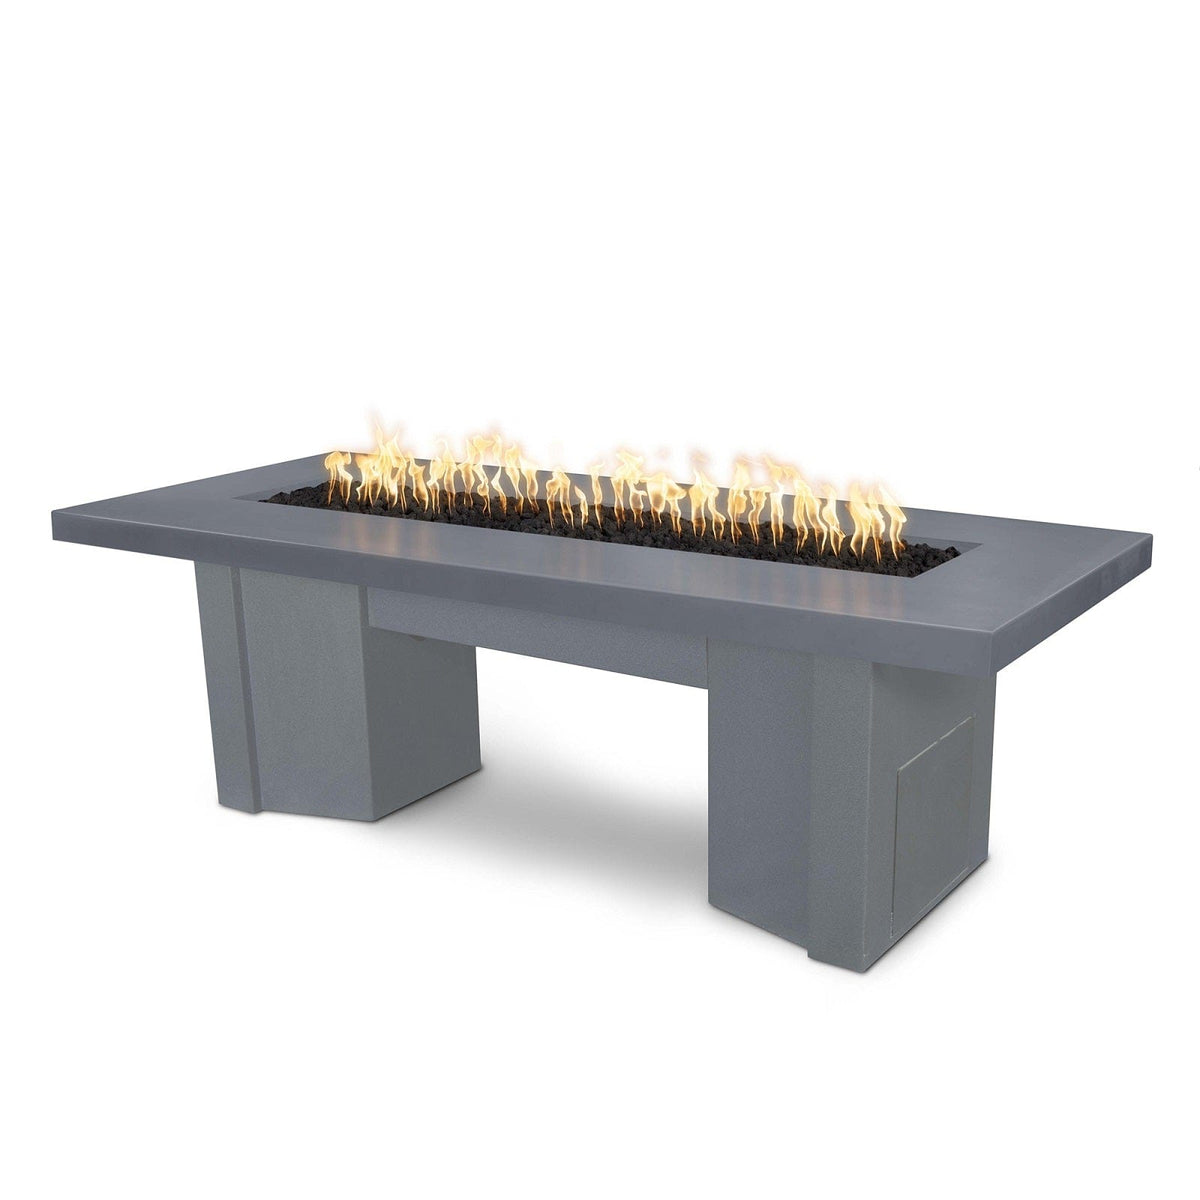 The Outdoor Plus Fire Features Gray (-GRY) / Gray Powder Coated Steel (-GRY) The Outdoor Plus 60&quot; Alameda Fire Table Smooth Concrete in Natural Gas - Flame Sense System with Push Button Spark Igniter / OPT-ALMGFRC60FSEN-NG